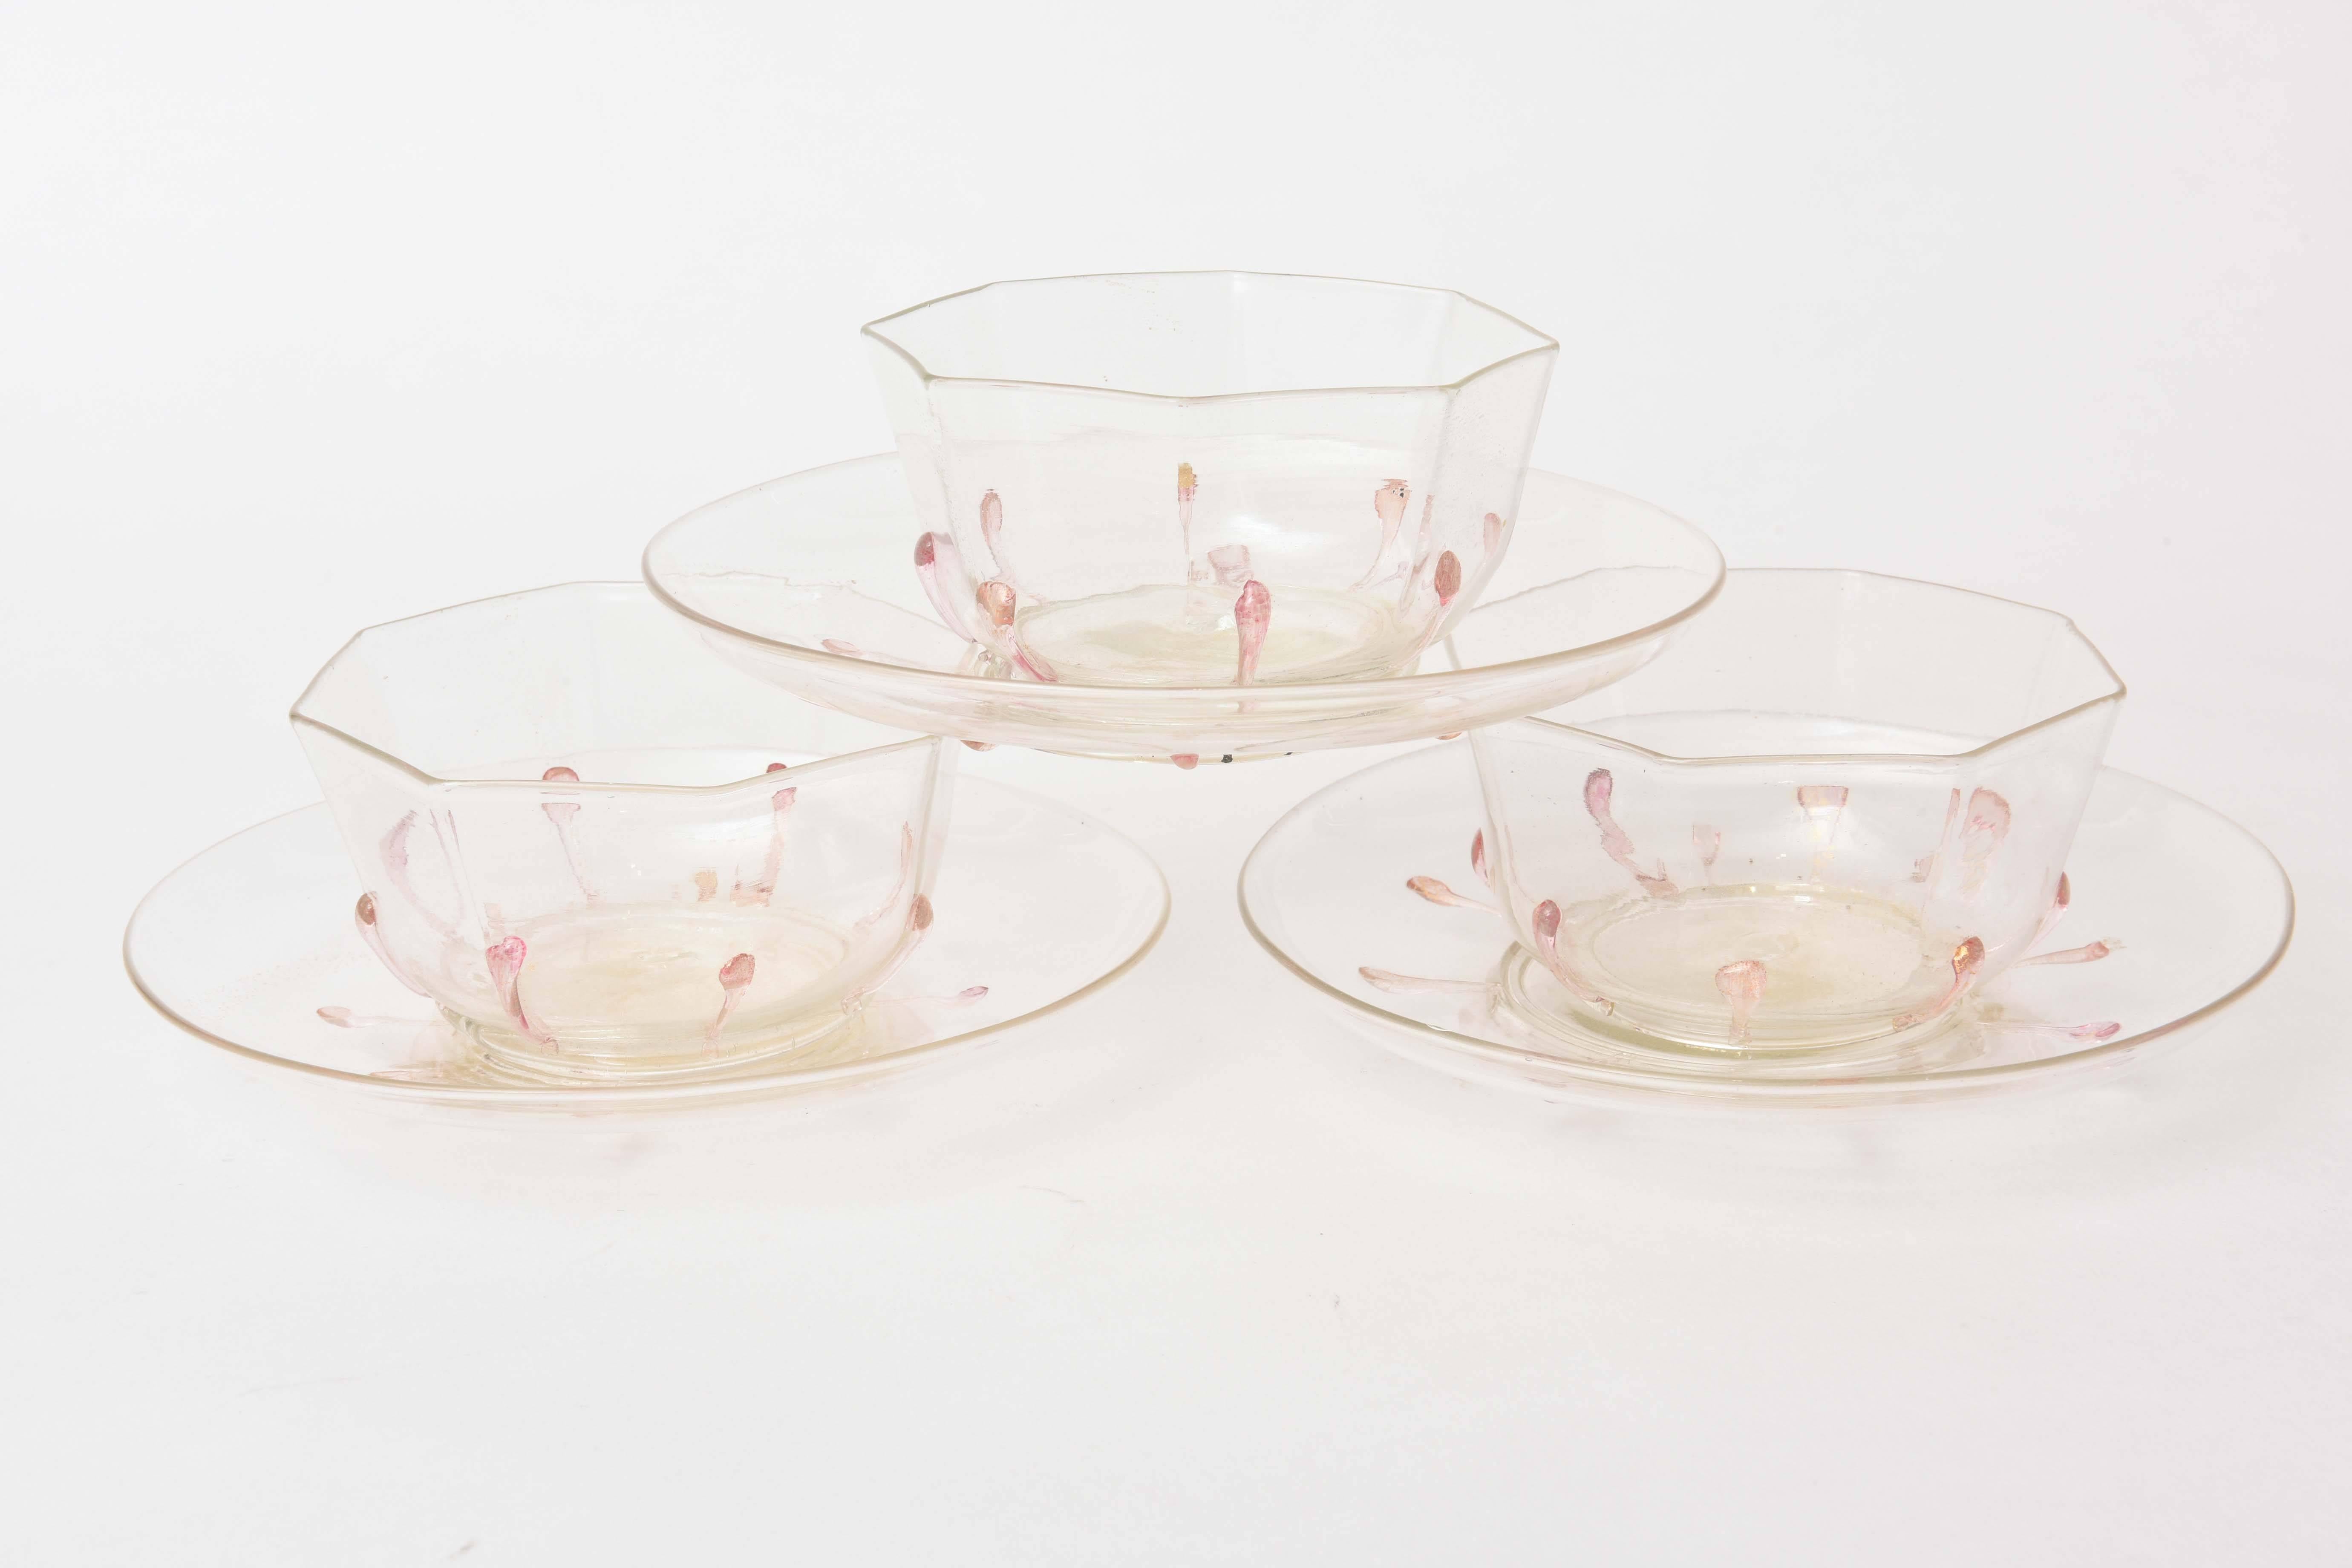 Antique Set of 12 Venetian Glass Bowls, Plates in Pretty Pink and Gold 24 Pieces 2